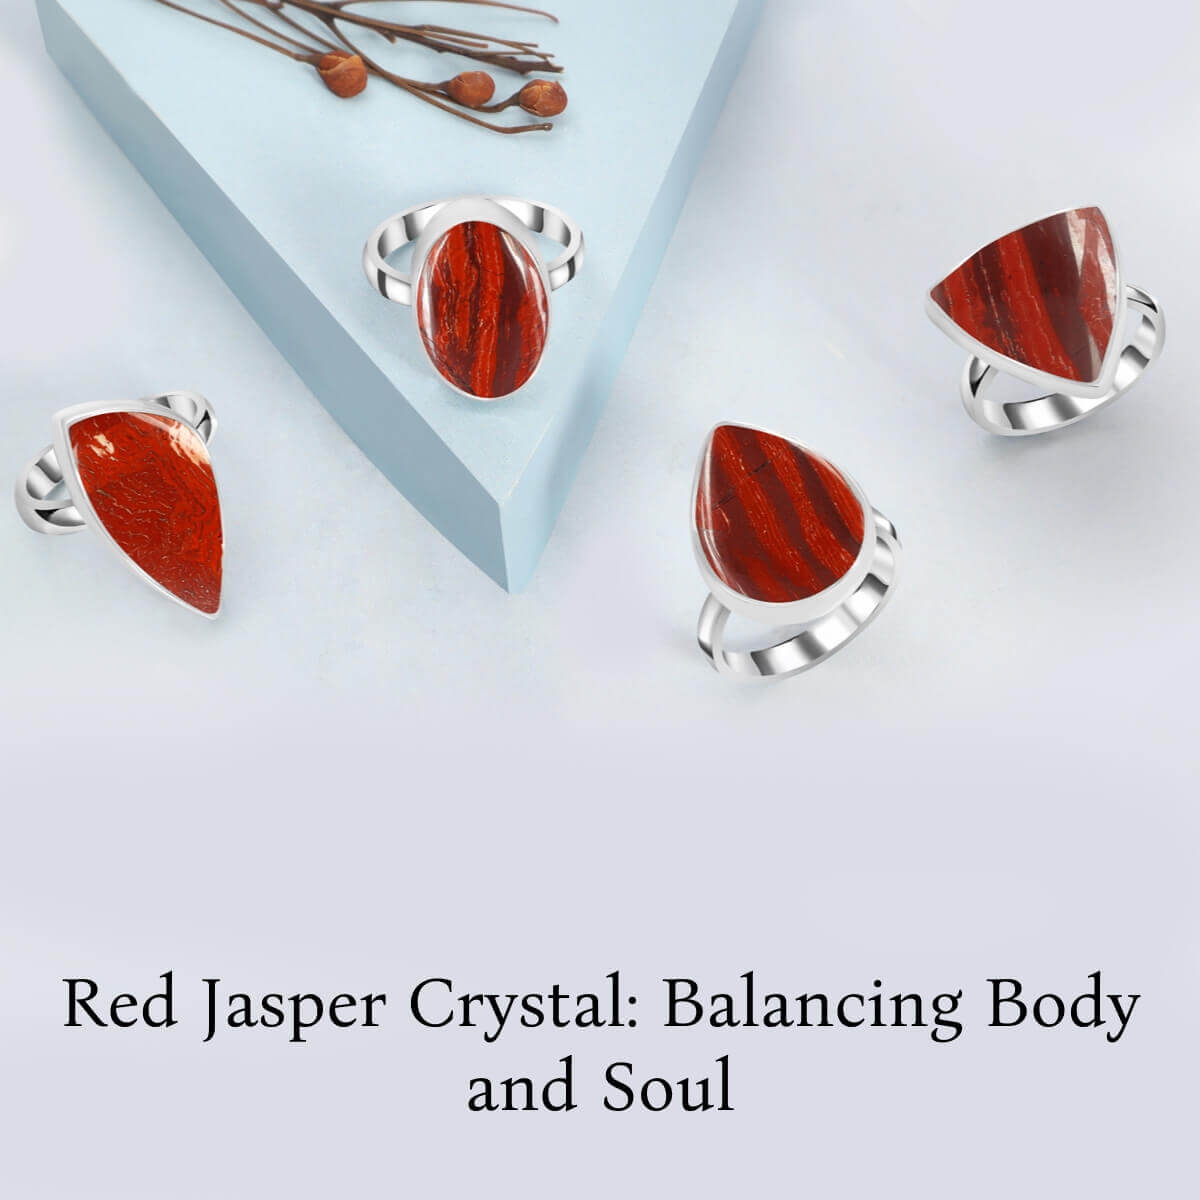 Heal Yourself Physically & Emotionally With Red Jasper Crystal